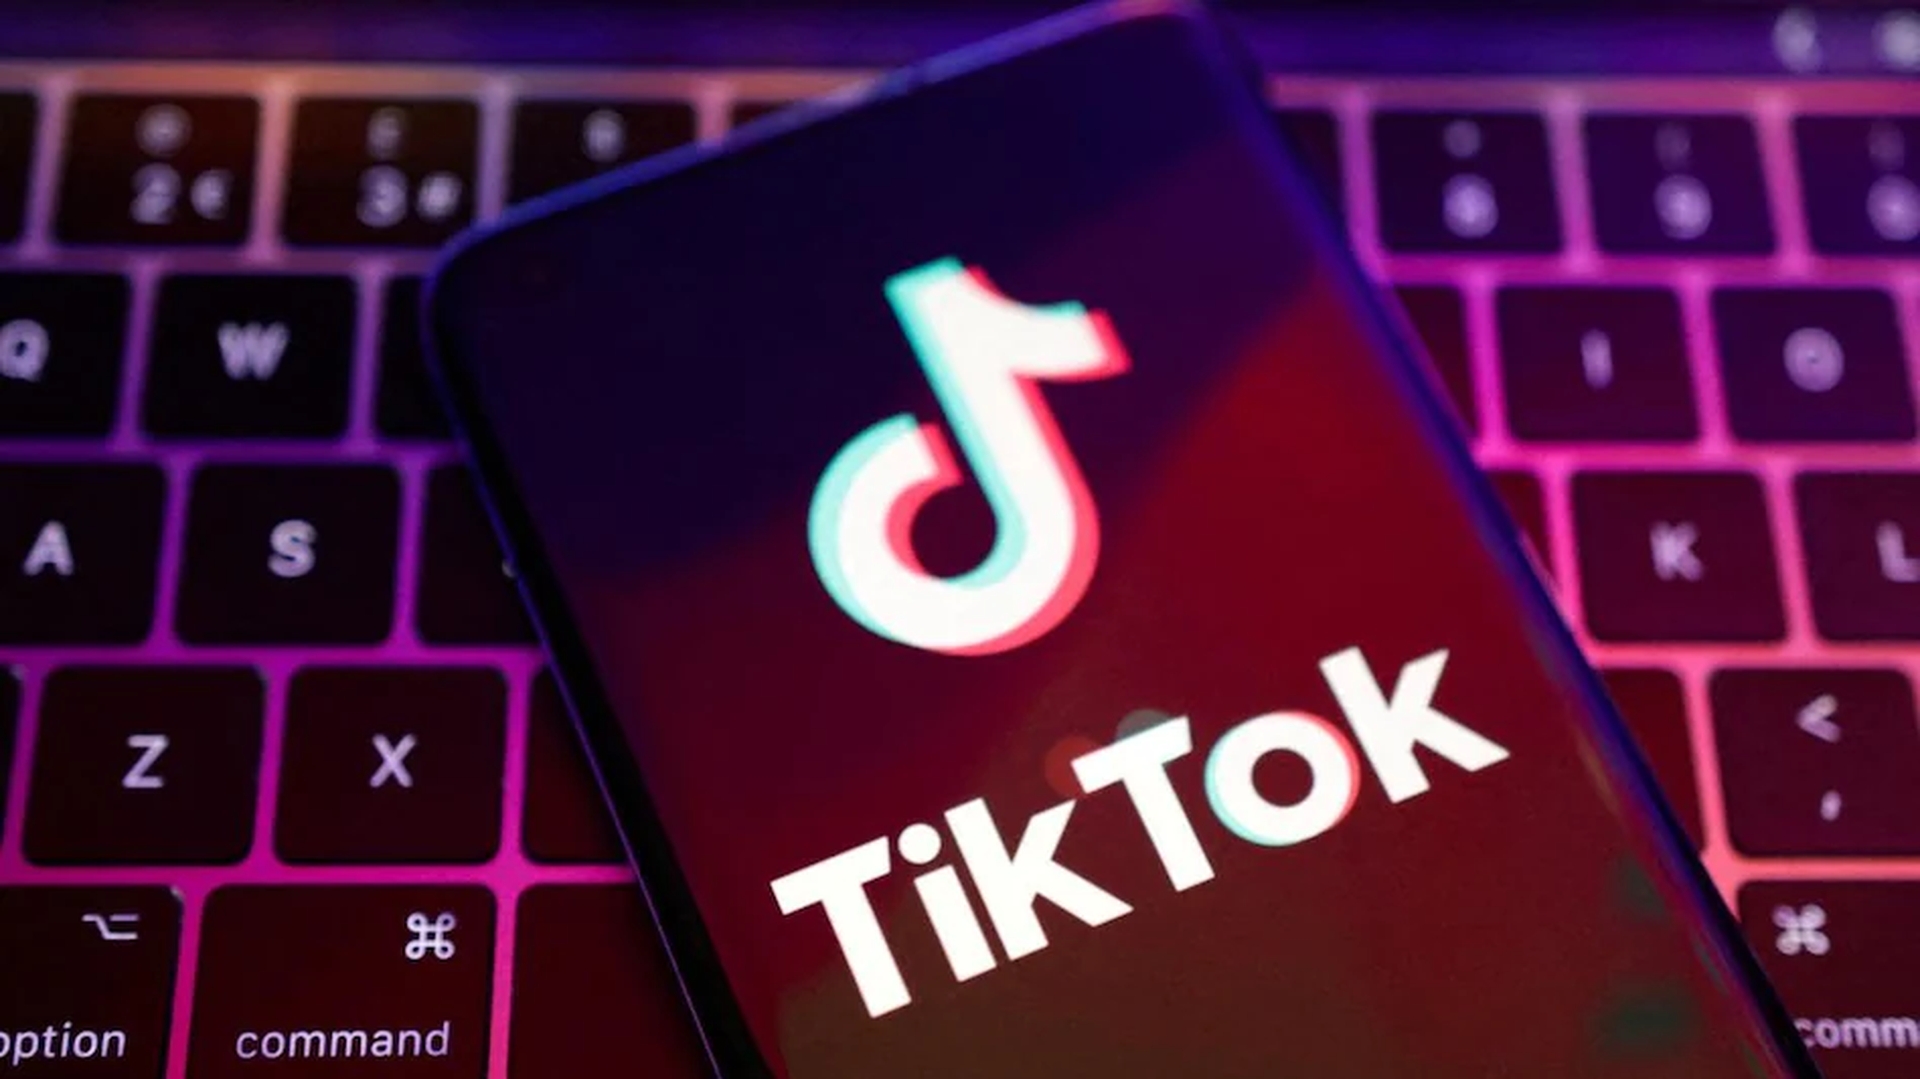 In this article, we are going to be covering how much is 1 million diamonds on TikTok, and answer some of the most frequently asked questions about the subject.